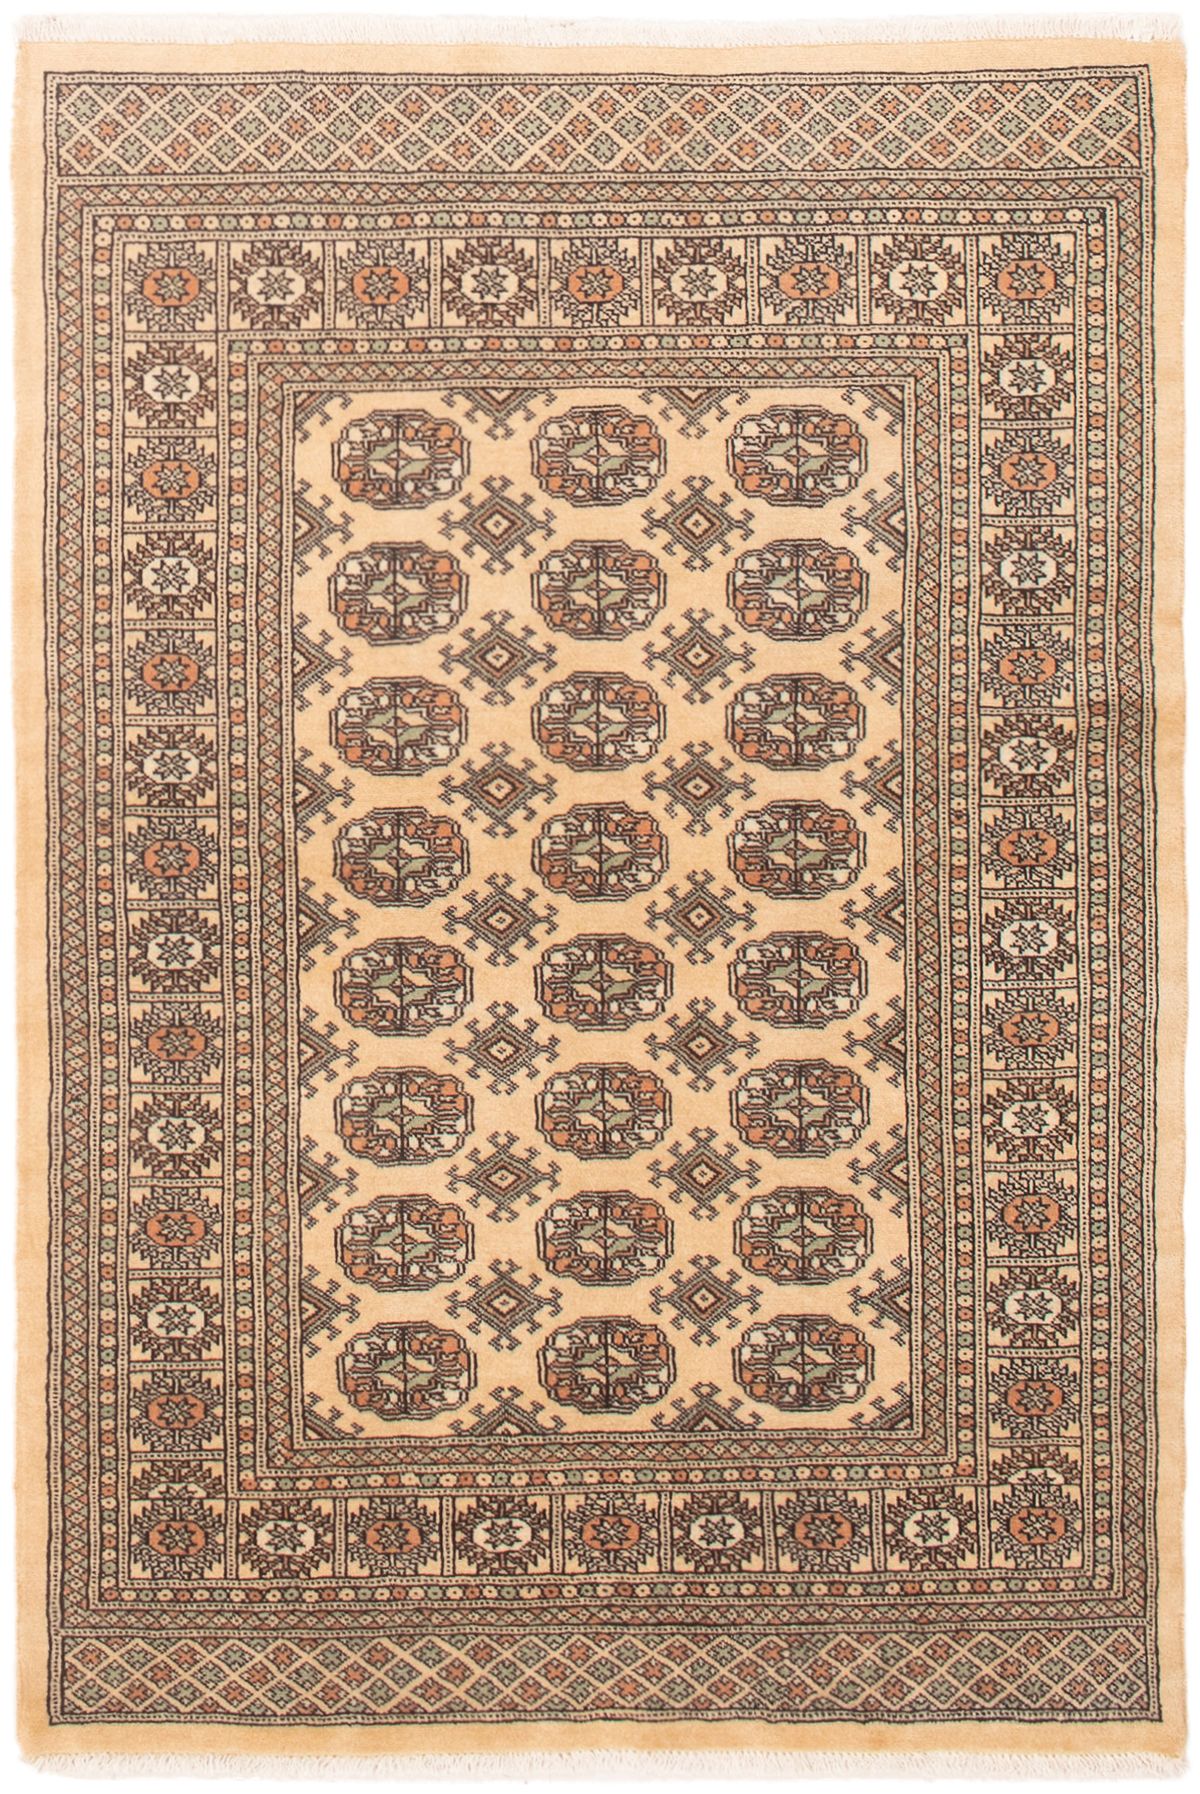 Hand-knotted Finest Peshawar Bokhara Ivory Wool Rug 4'0" x 6'0"  Size: 4'0" x 6'0"  